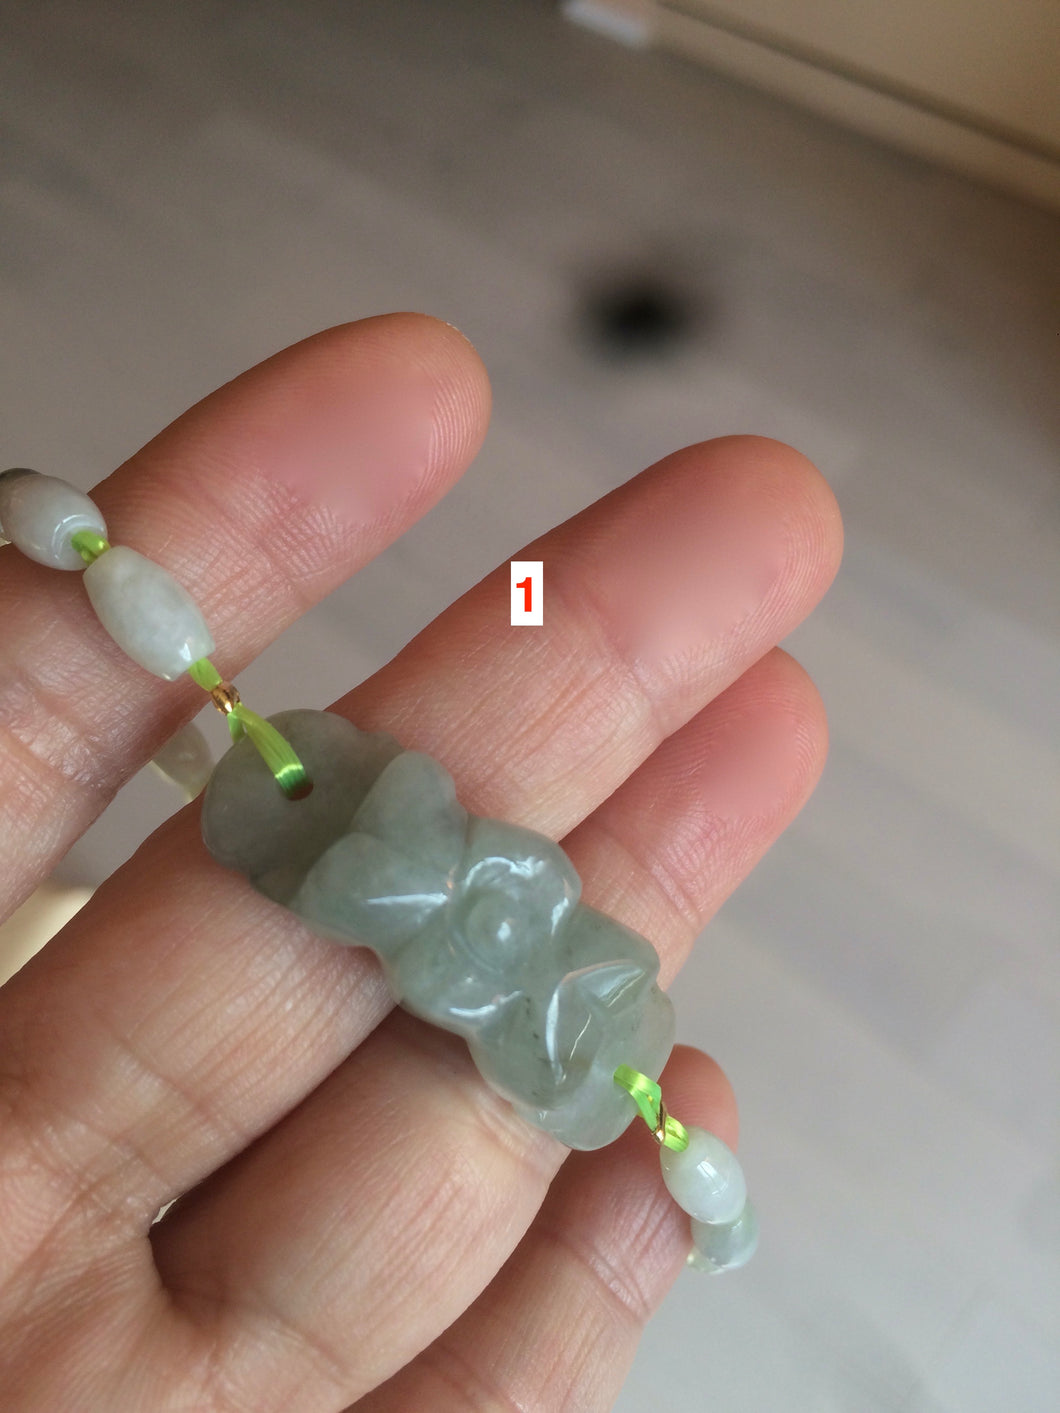 Type A 100% Natural light green/white carving flowers vintage style Jadeite Jade bracelet group AH33 (Clearance item)